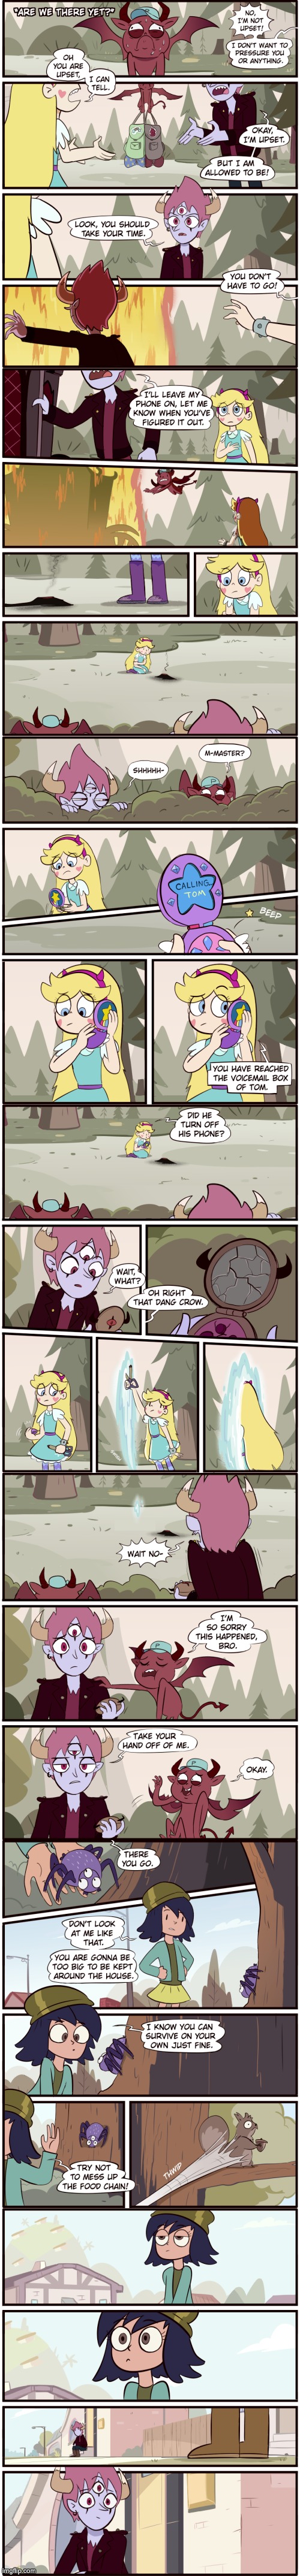 Tom vs Jannanigans: Are We There Yet? (Part 1) | image tagged in morningmark,comics/cartoons,svtfoe,star vs the forces of evil,comics,memes | made w/ Imgflip meme maker